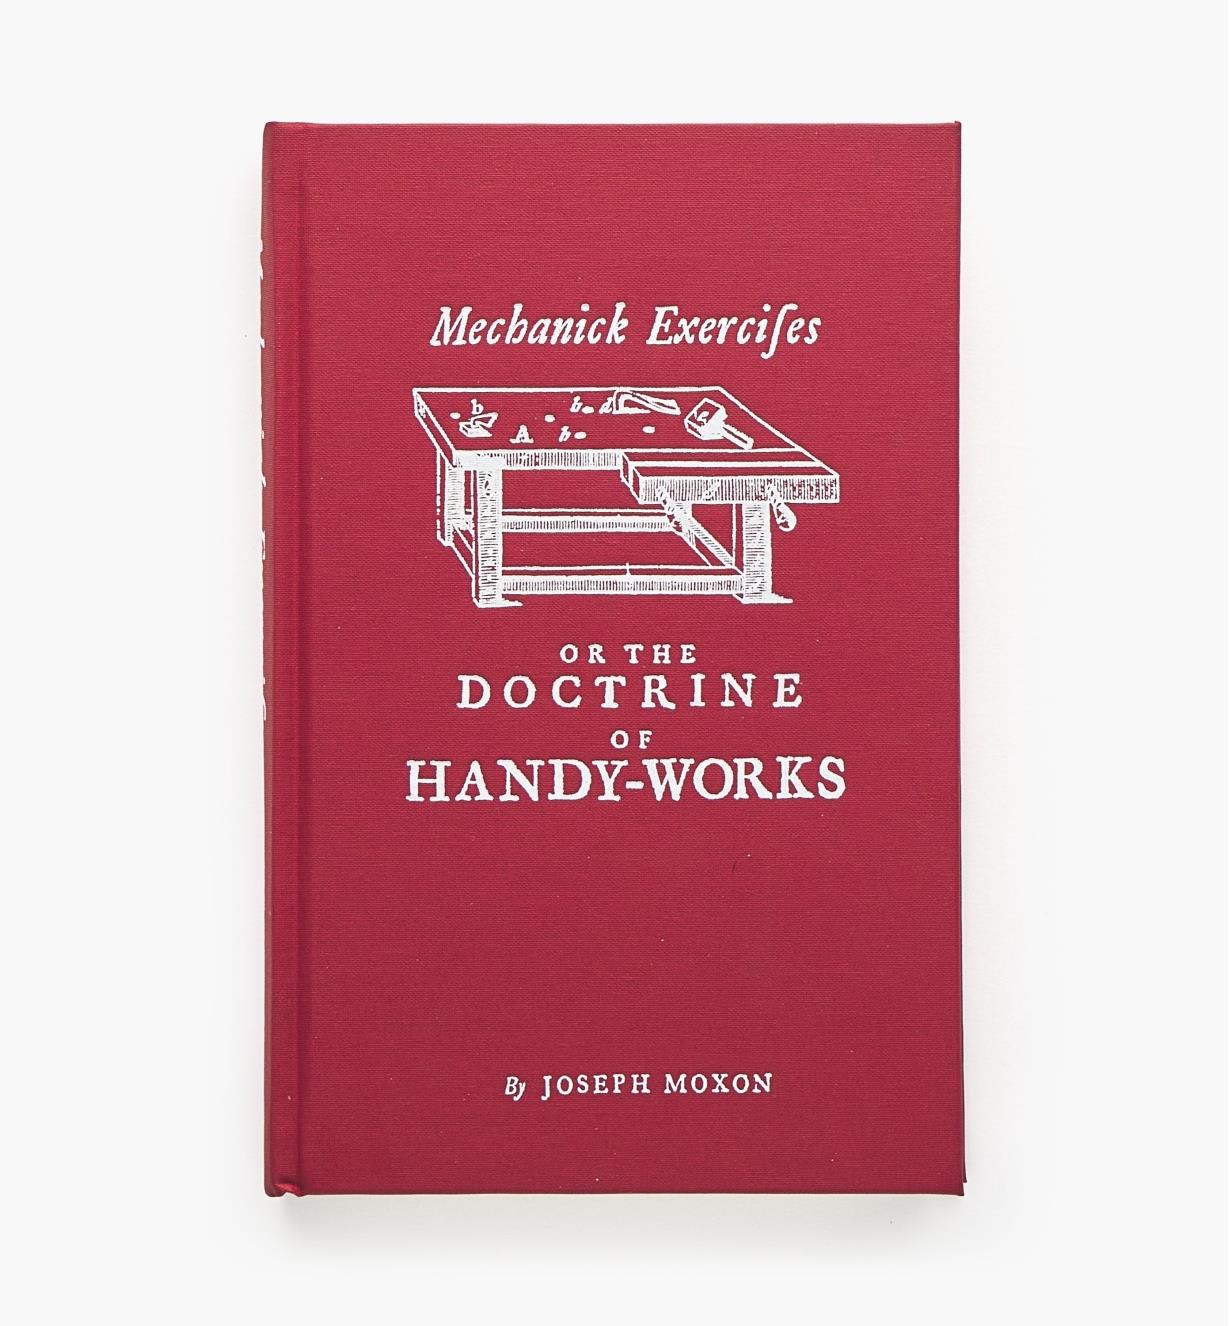 20L0359 - Mechanick Exercises or The Doctrine of Handy-Works